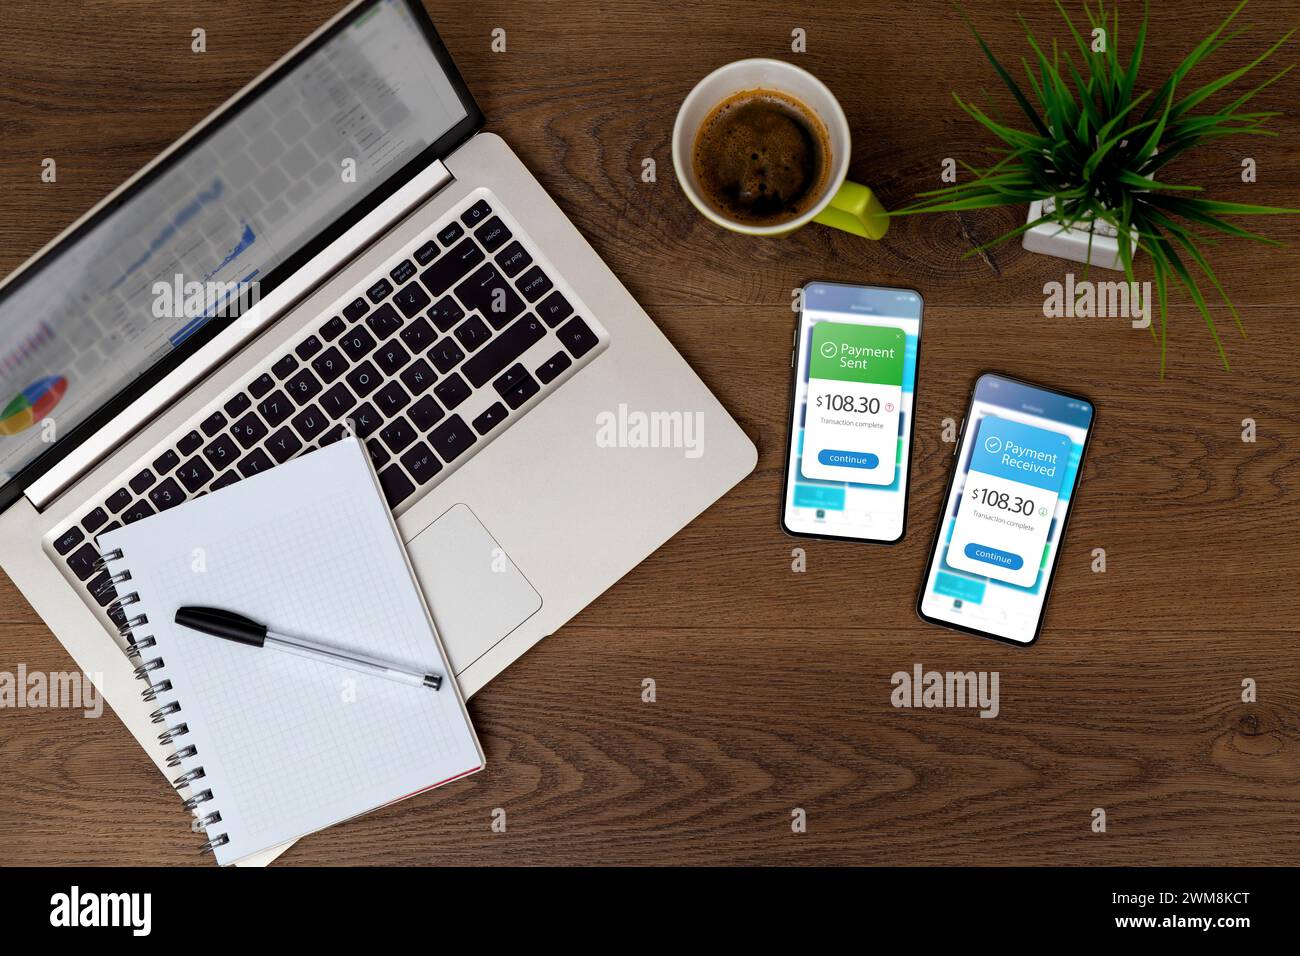 Two smartphones over the desktop showing sending and receiving payments through a digital wallet application on a mobile phone. Bank transfer concept. Stock Photo